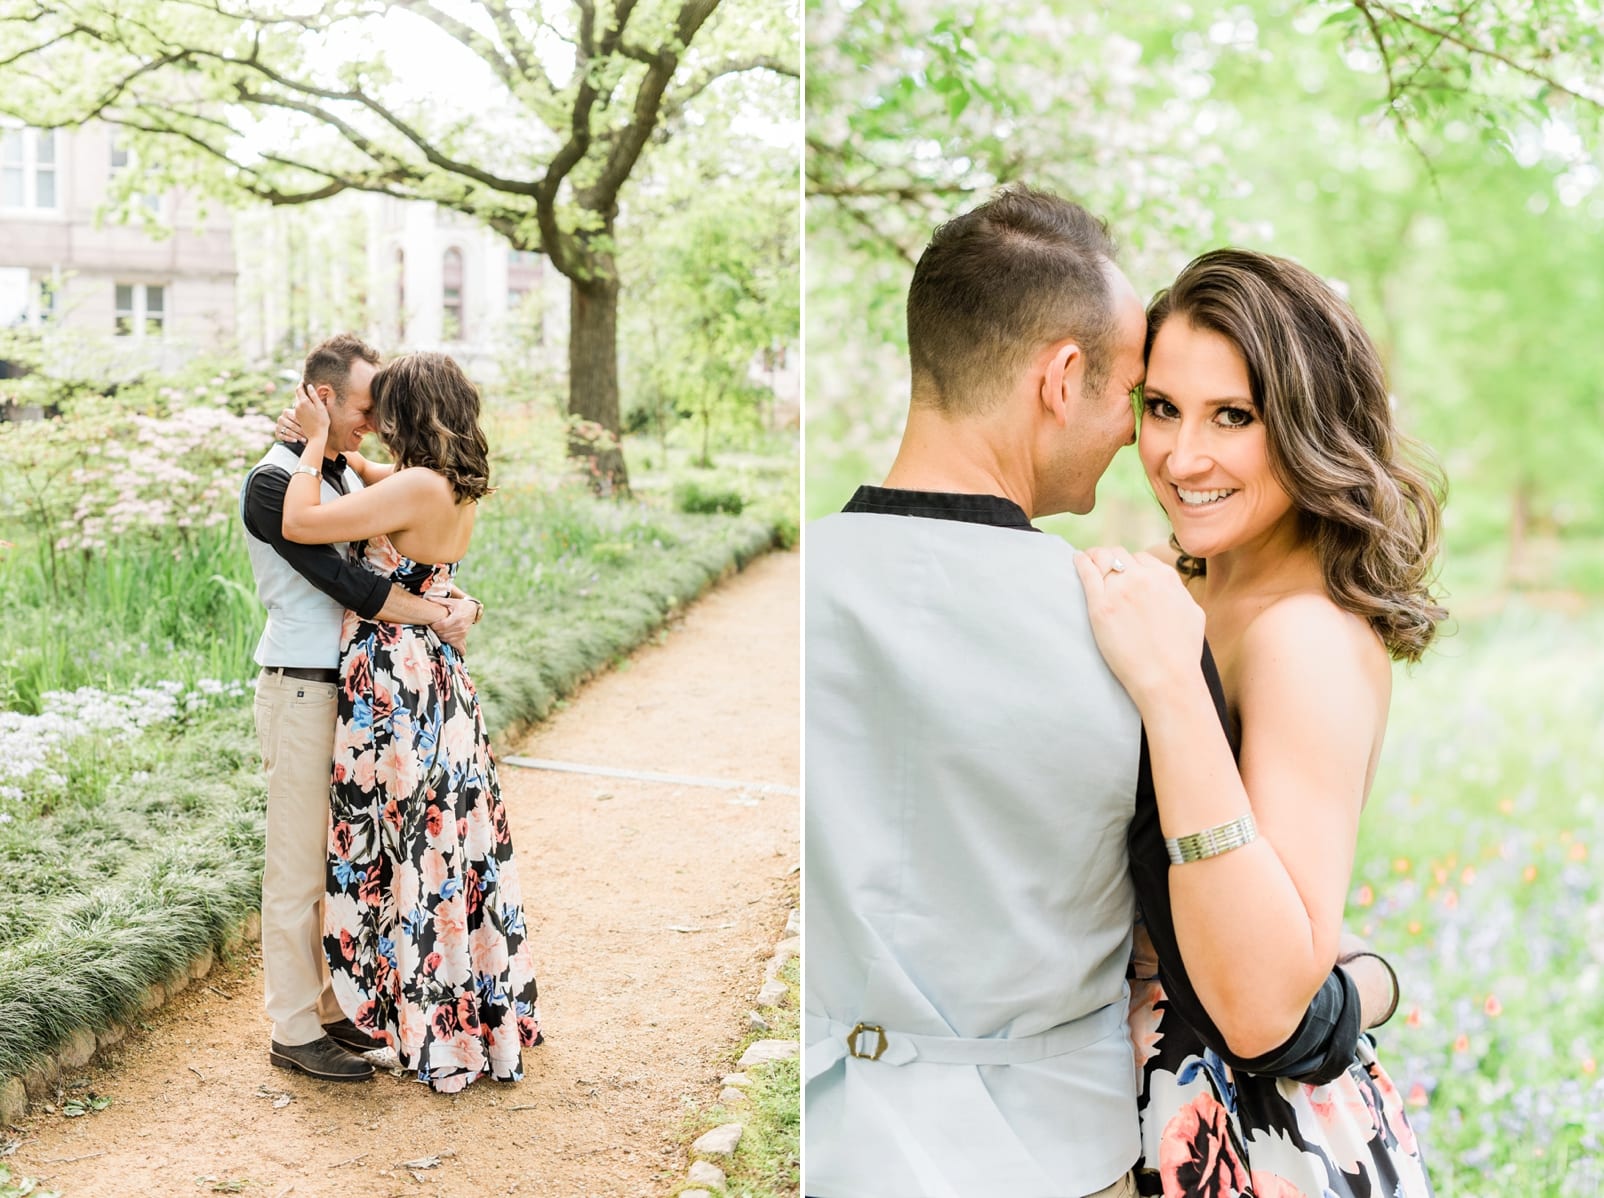 Chapel Hill couple snuggled together on UNC's campus for engagement pictures. Bride in long flower dress photo